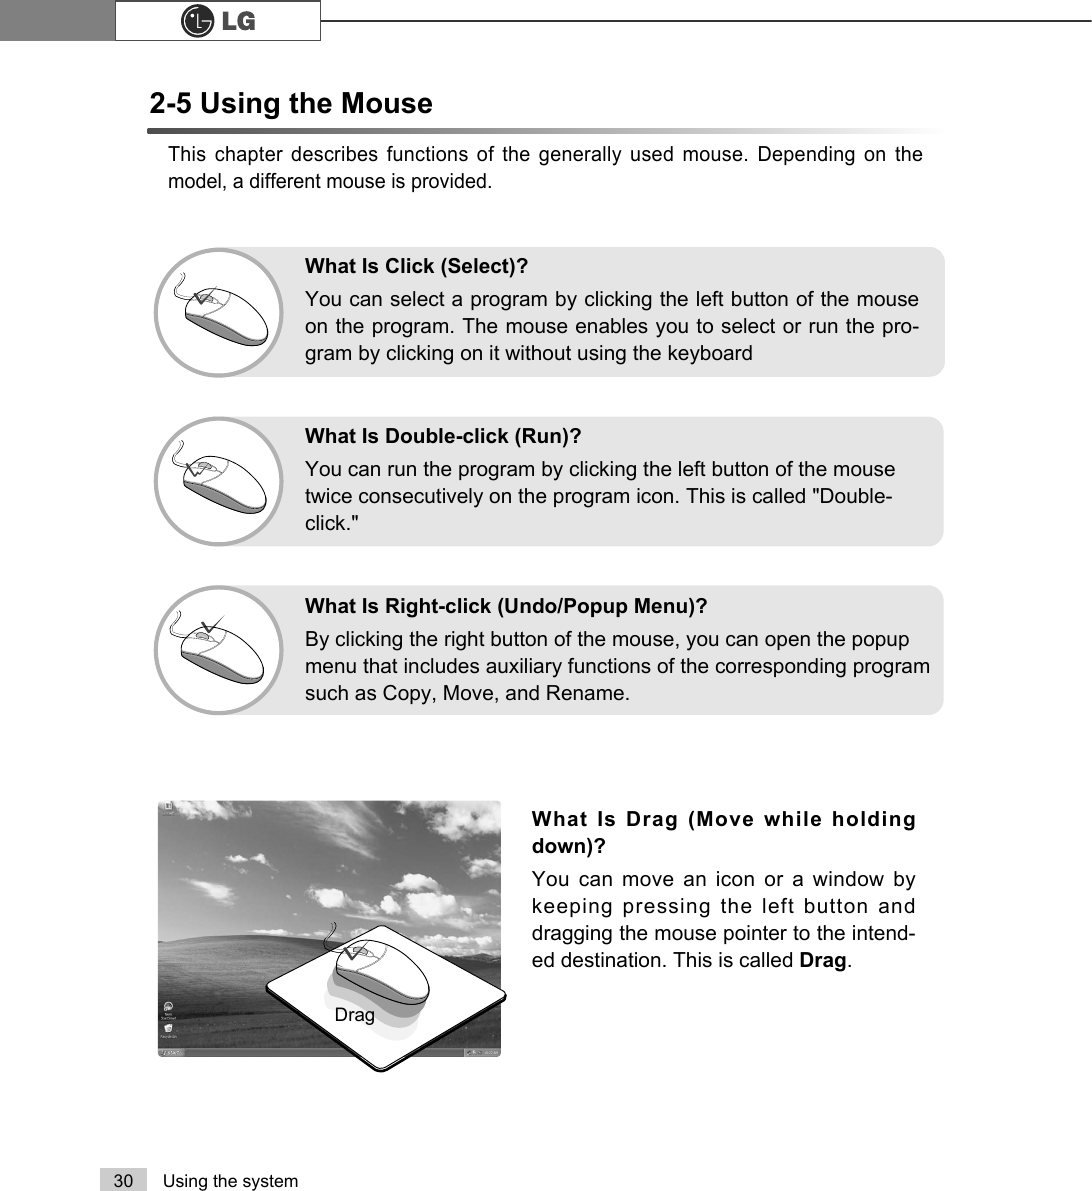 30 Using the systemThis chapter describes functions of the generally used mouse. Depending on themodel, a different mouse is provided.What Is Drag (Move while holdingdown)? You can move an icon or a window bykeeping pressing the left button anddragging the mouse pointer to the intend-ed destination. This is called Drag. DragWhat Is Double-click (Run)?You can run the program by clicking the left button of the mousetwice consecutively on the program icon. This is called &quot;Double-click.&quot; What Is Right-click (Undo/Popup Menu)?By clicking the right button of the mouse, you can open the popupmenu that includes auxiliary functions of the corresponding programsuch as Copy, Move, and Rename.What Is Click (Select)?You can select a program by clicking the left button of the mouseon the program. The mouse enables you to select or run the pro-gram by clicking on it without using the keyboard2-5 Using the Mouse